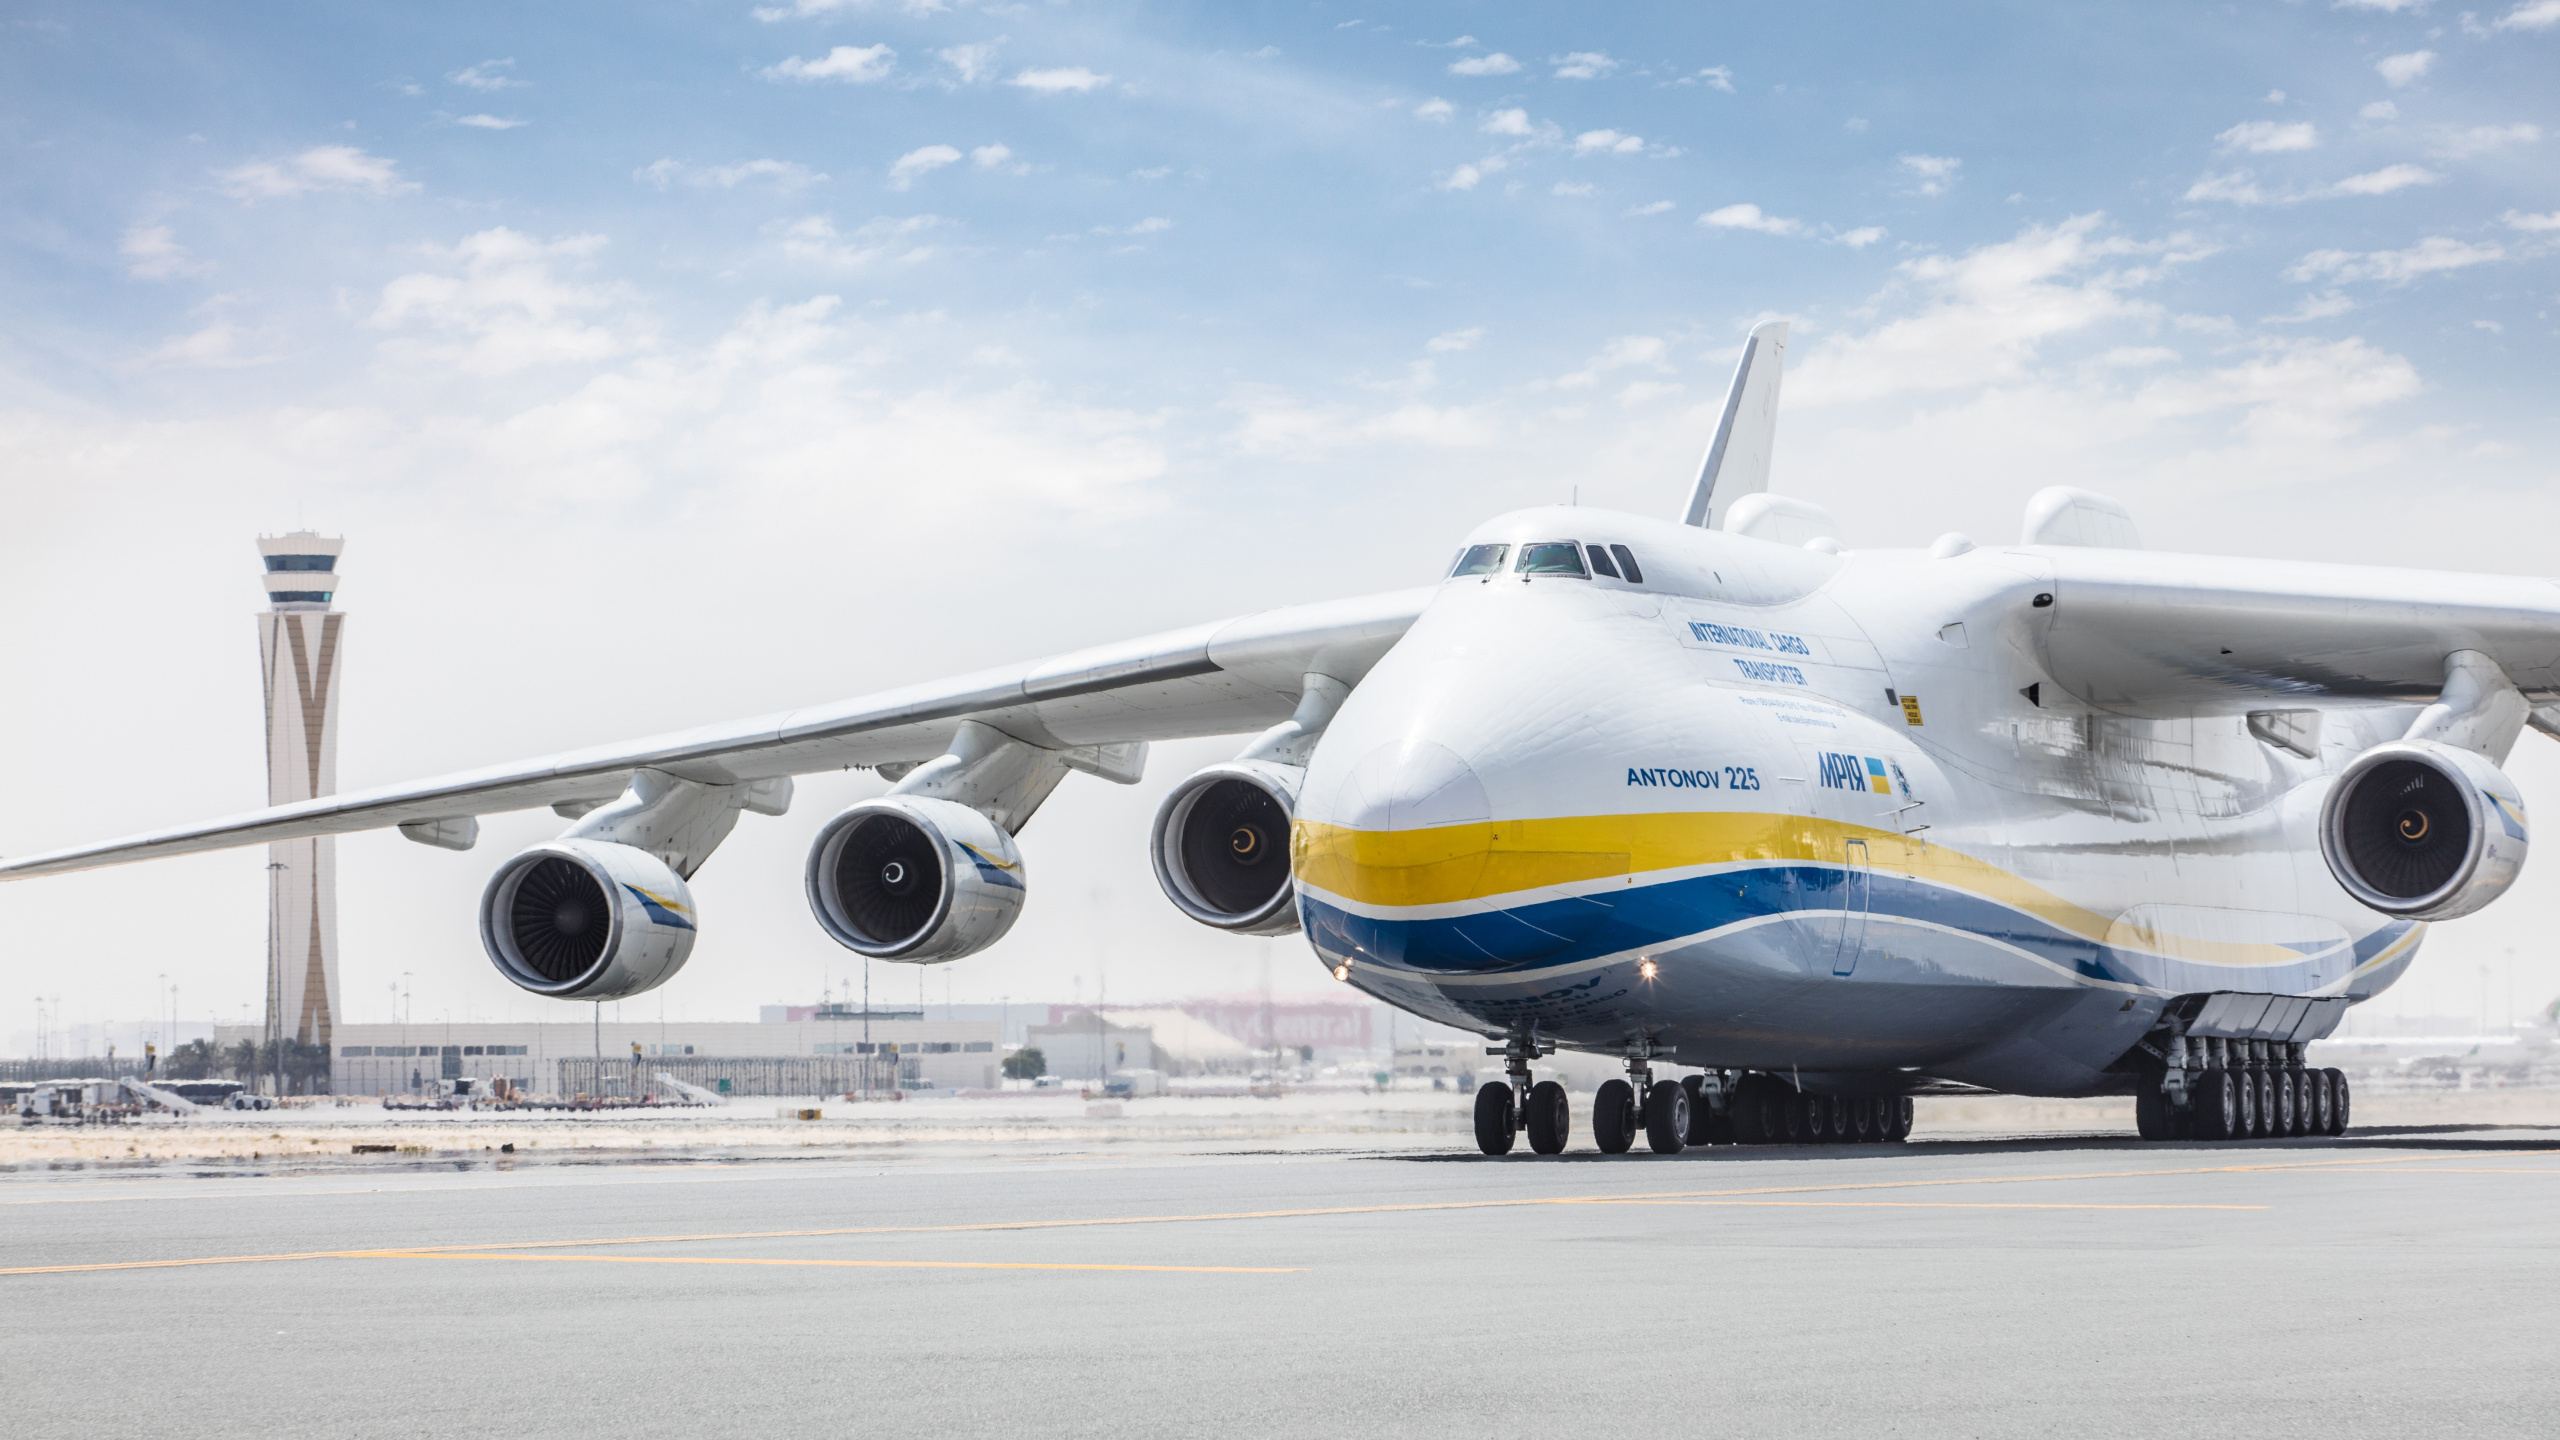 Aircraft, Airplane, Cargo Aircraft, Airliner, Antonov. Wallpaper in 2560x1440 Resolution